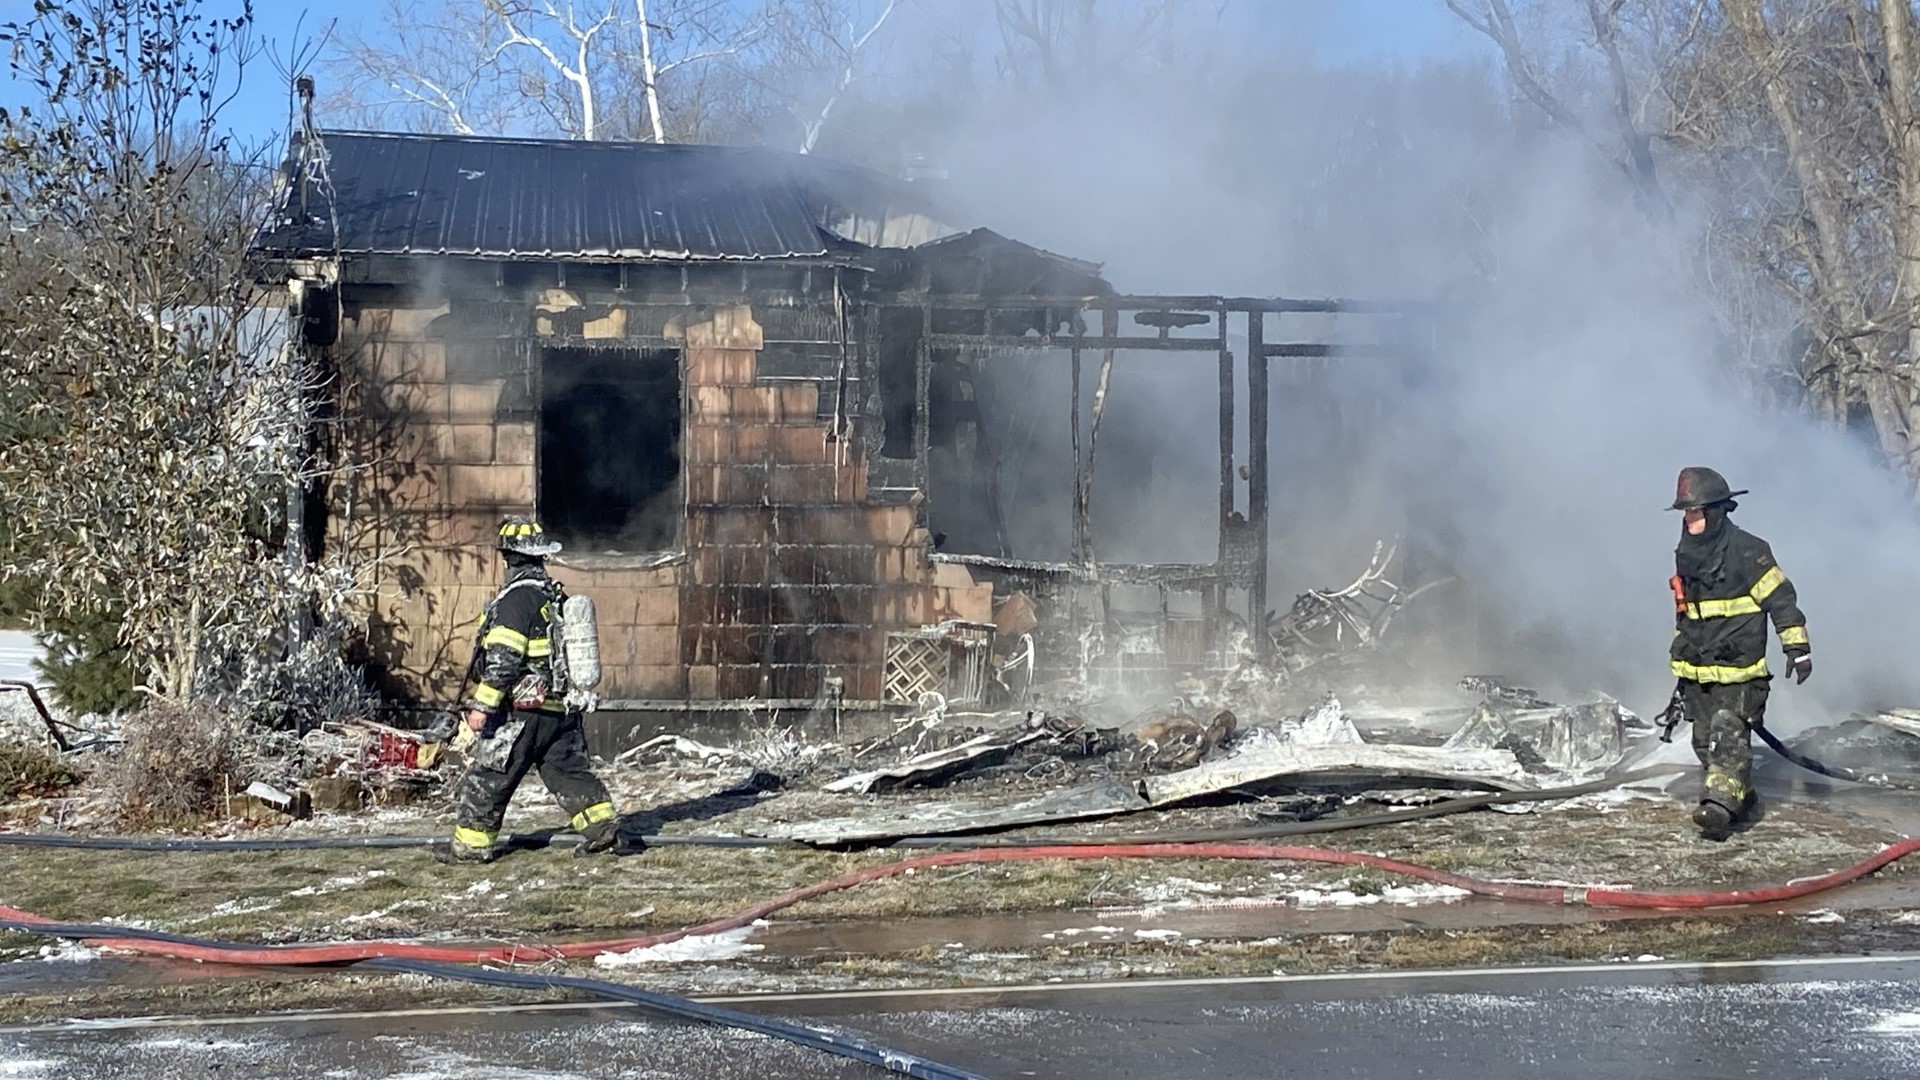 Two children were killed after an explosion Friday morning in St. Charles County. Crews responded to a house fire at about 7:45 a.m. Friday in Defiance.